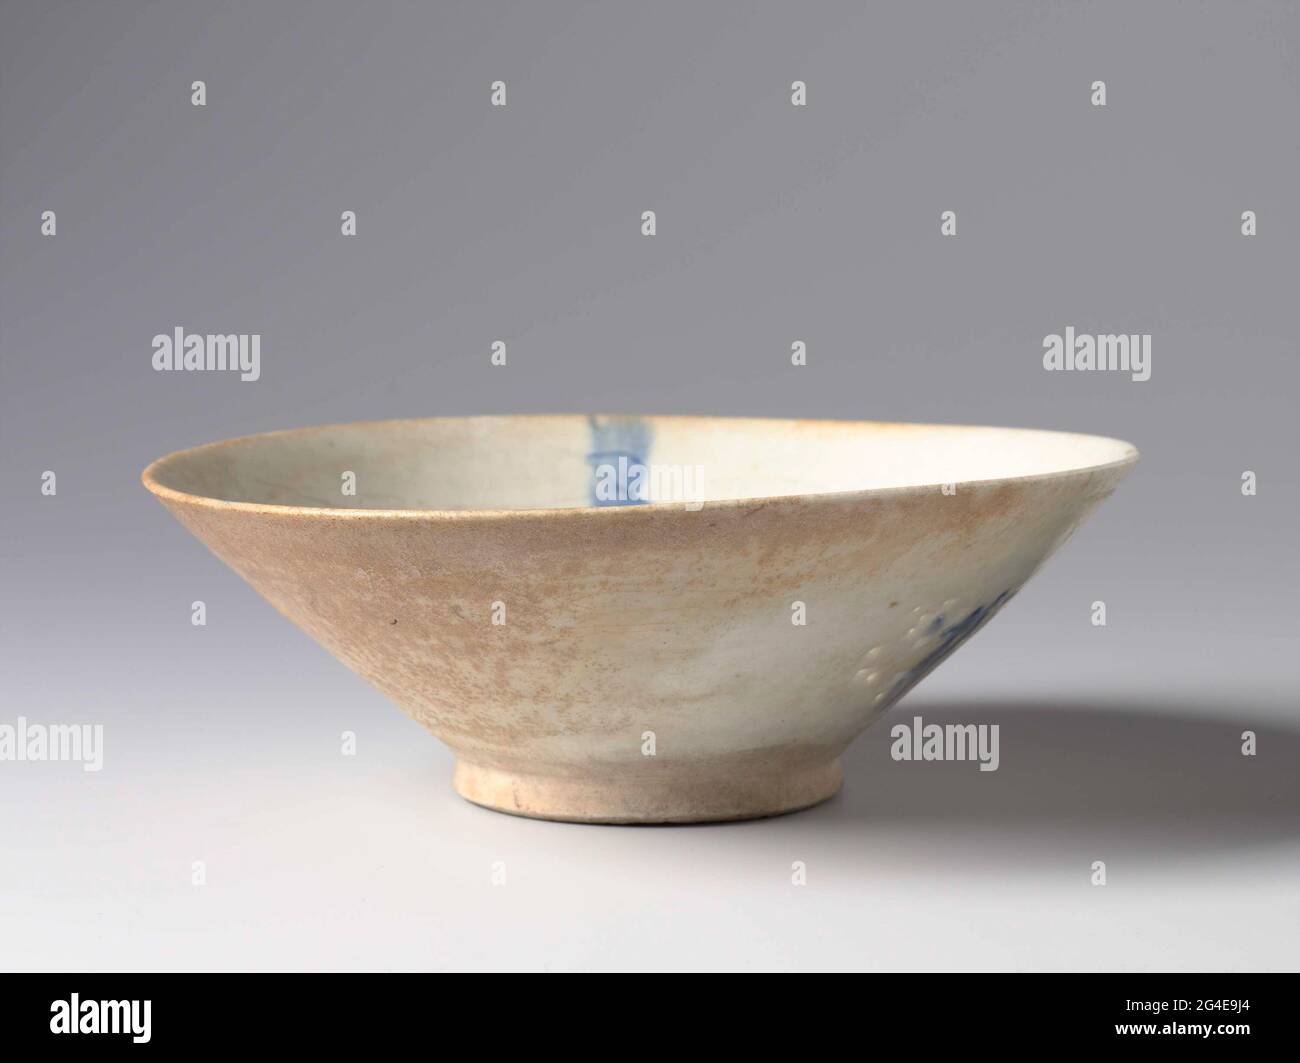 . Iranian potters admired the porcelain imported from China. From the 12th century they began using a new material, quartz paste fritware: white clay ground with fine quartz and glass powder. It allowed them to throw much thinner walls. They were trying to approximatethe translucency of Chinese porcelain. Sometimes, as with this bowl, they made perforations and used a transparent glaze to enhance this effect. Stock Photo